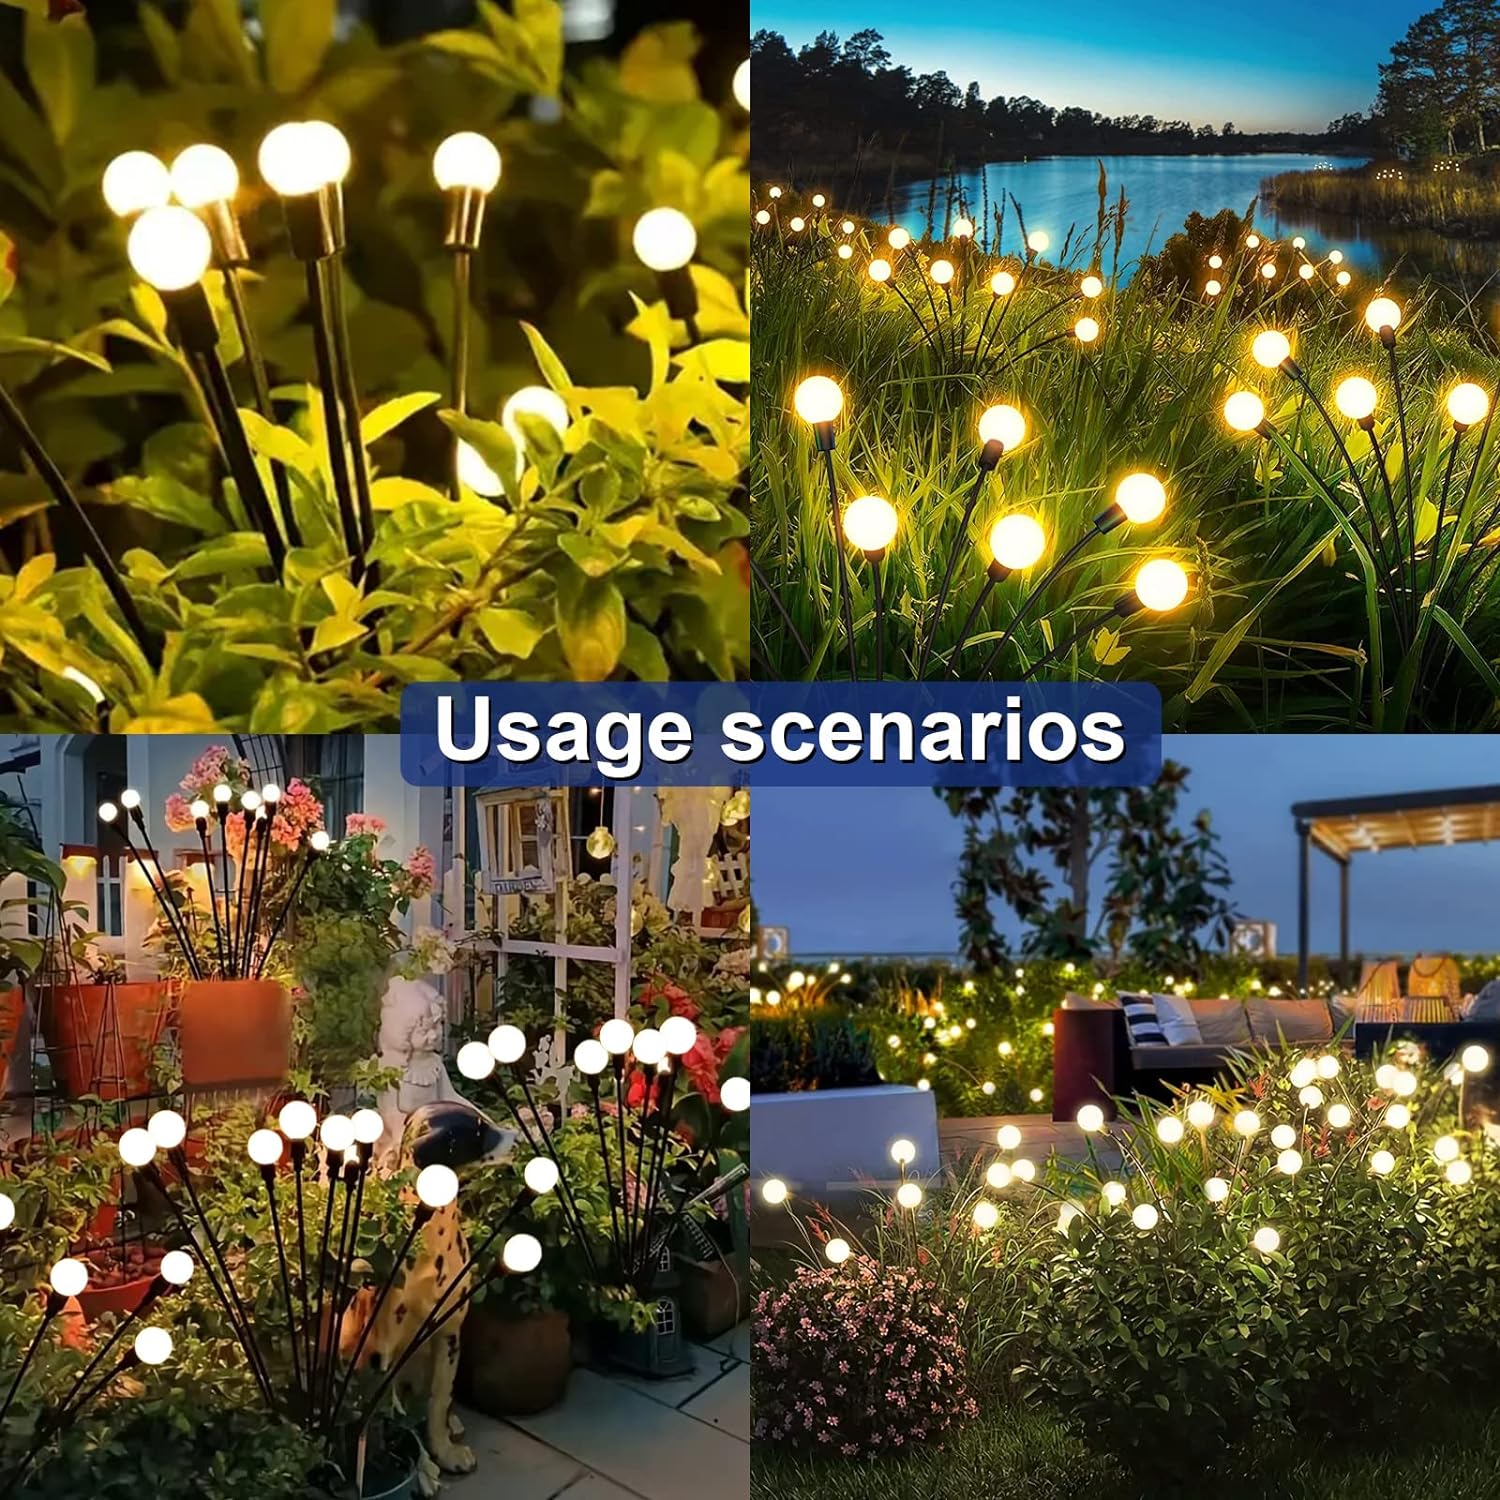 DS BS 2 Pack 10 LED Solar Powered Firefly Lights